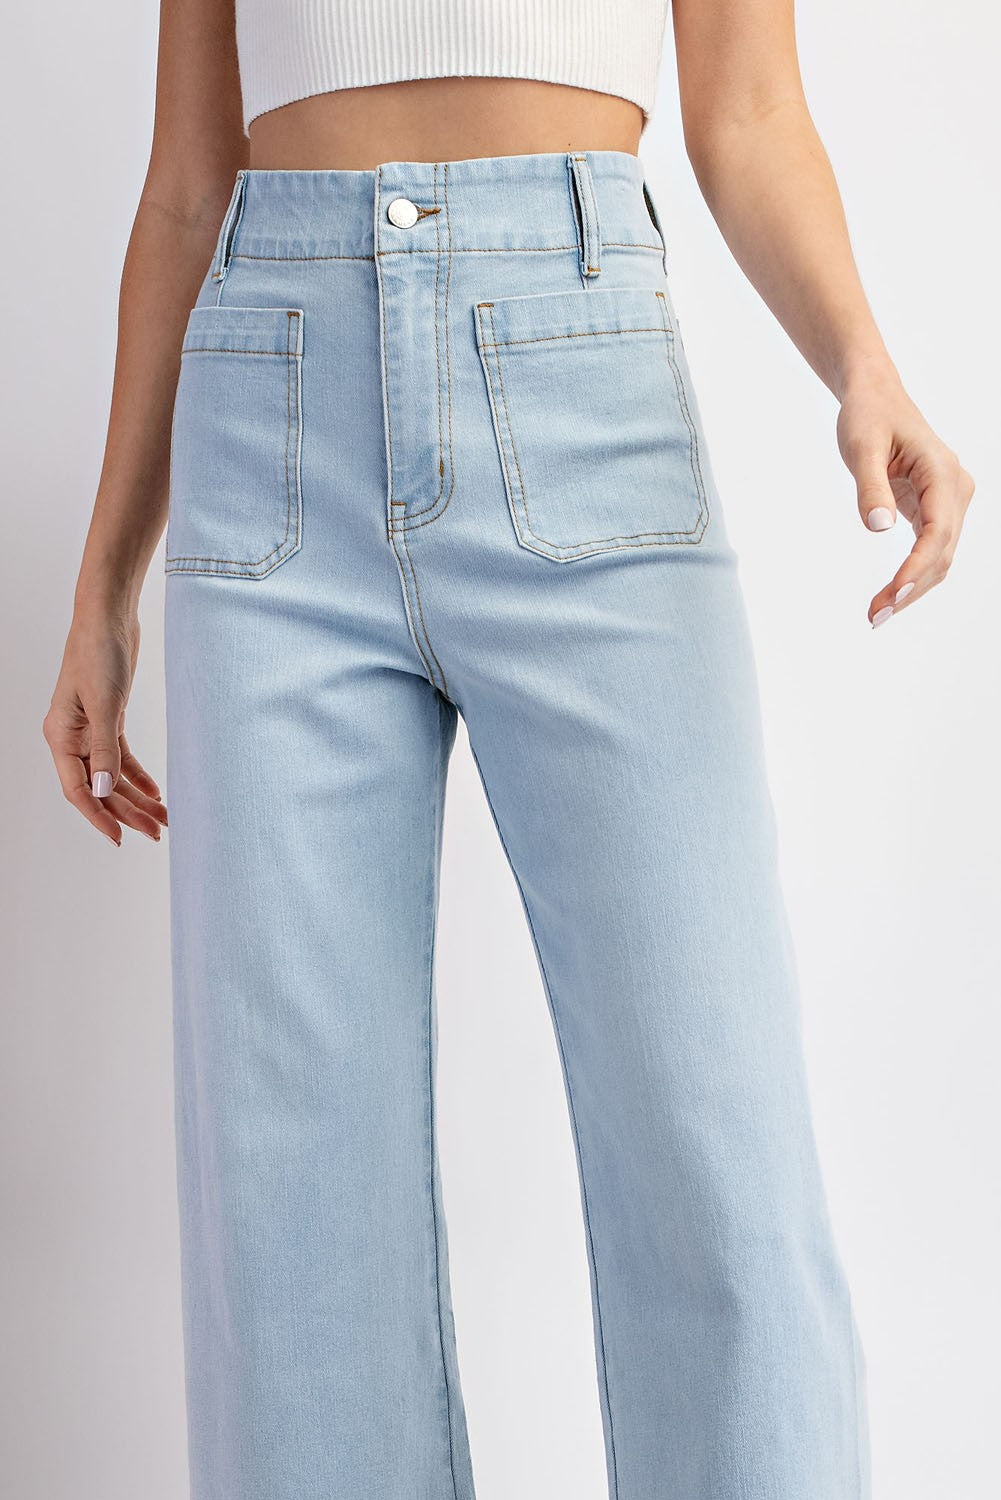 Denim Mineral Washed, High Waisted Jean Pants